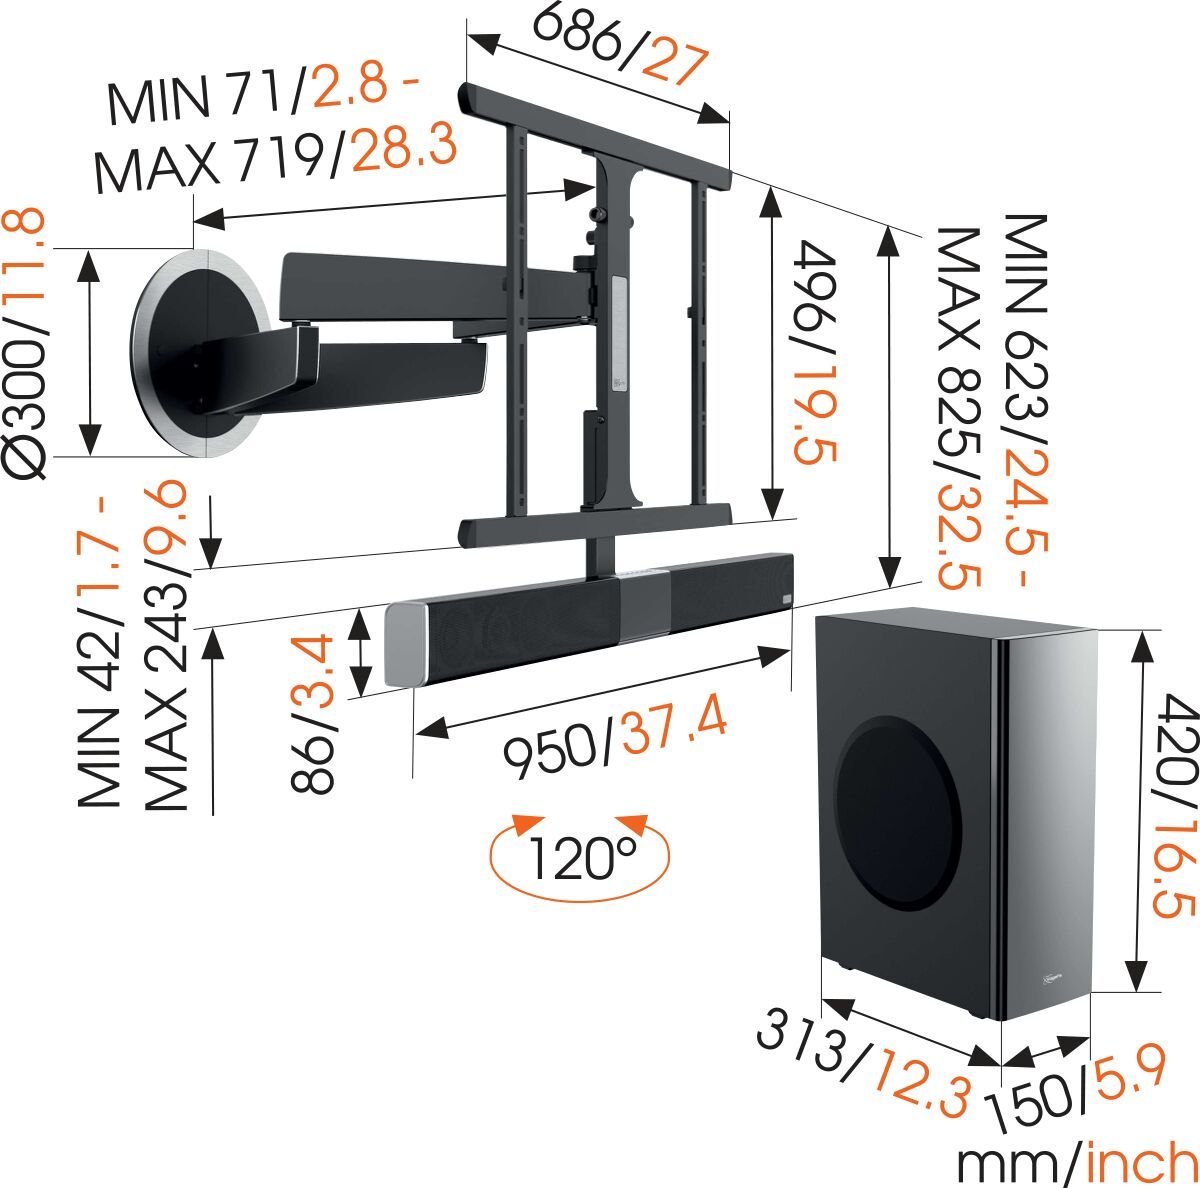 Vogel's SoundMount (NEXT 8365) Full-Motion TV Wall Mount with Integrated Sound 40 65 Motion (up to 120°) Dimensions